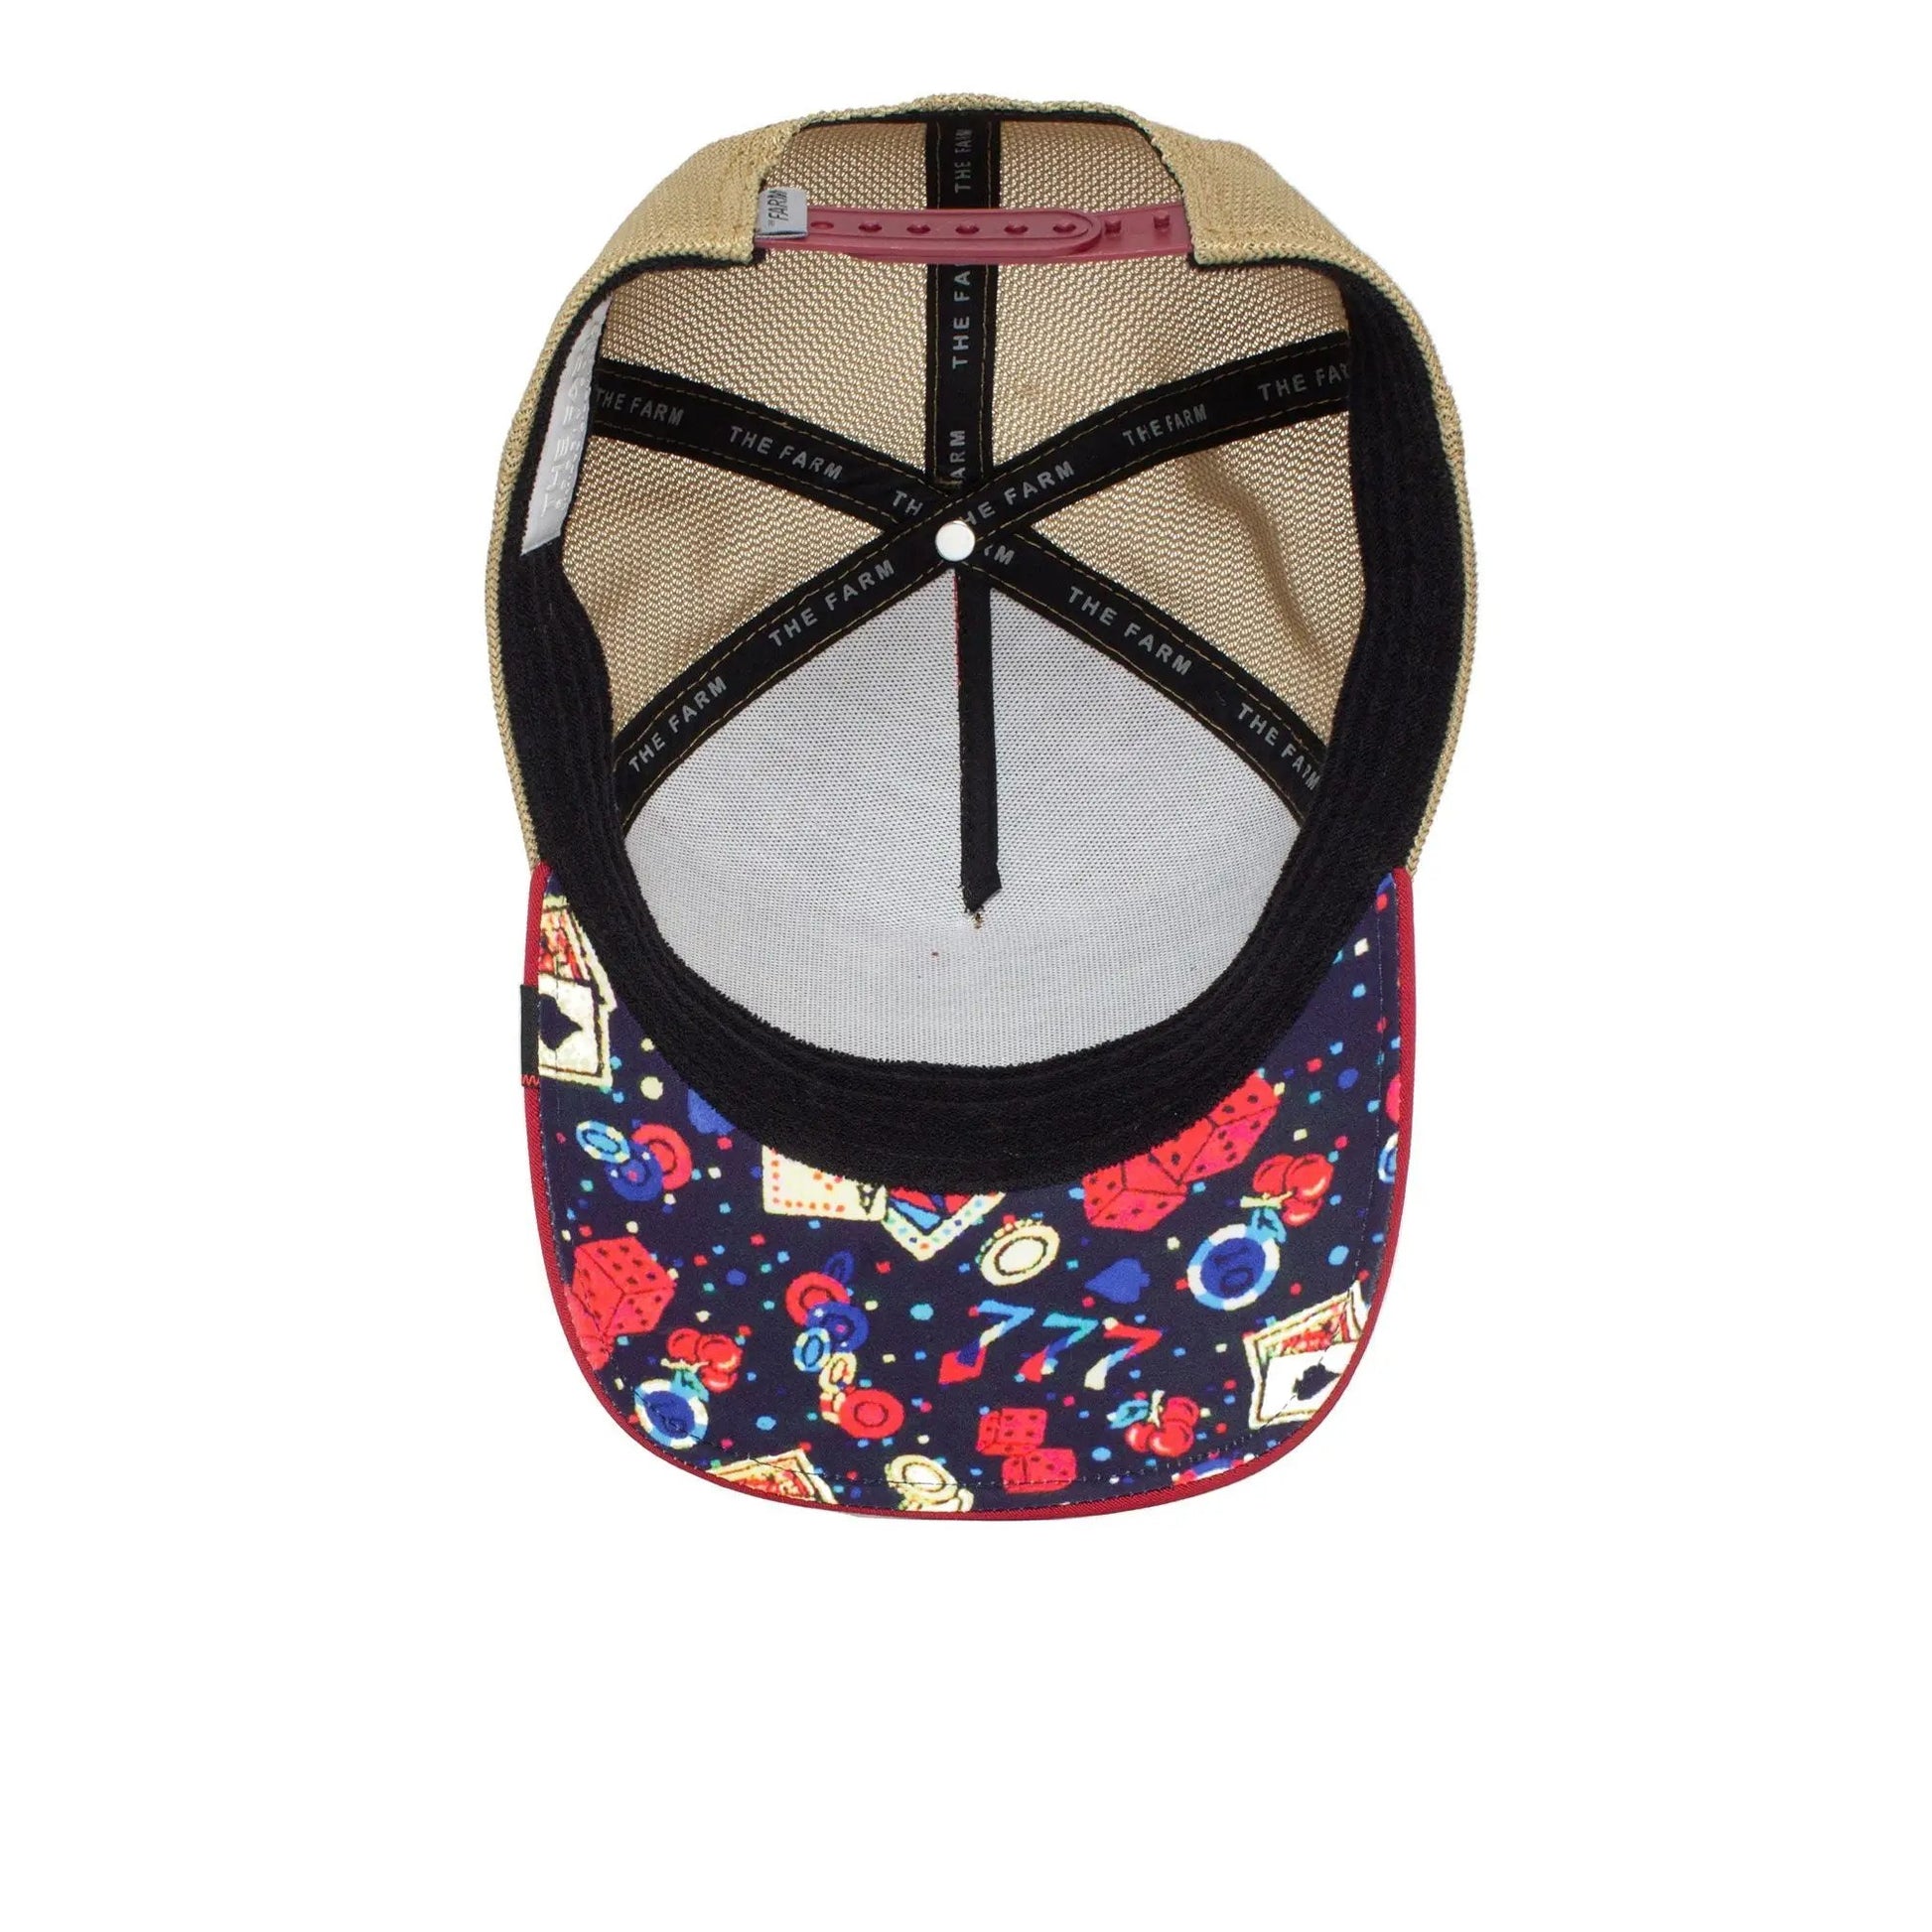 Jacked to be All In Snapback Hat - Limited Edition Goorin Bros Don't Be Chy Boutique